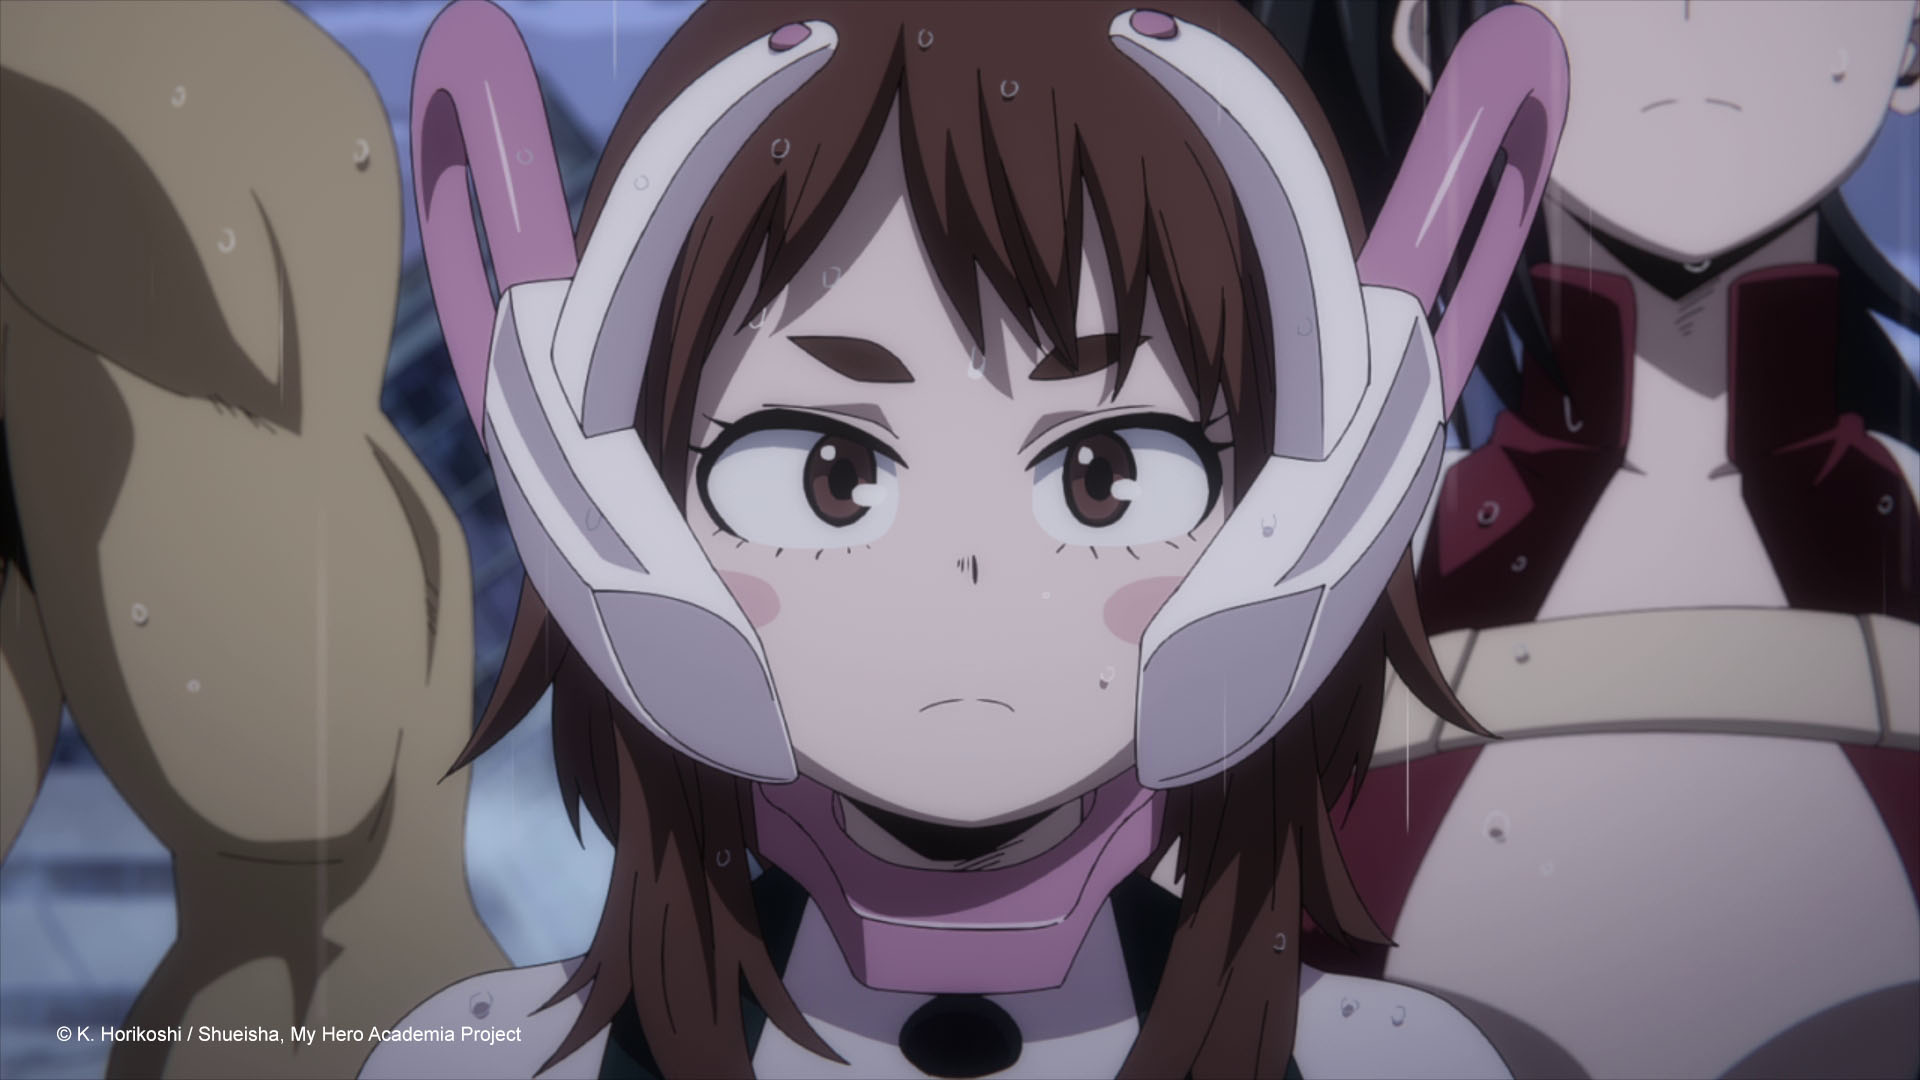 AnimeTV チェーン on X: Preview of Saturday's episode of My Hero Academia  Season 6 Part 2! Ochaco looks desperate 😔 ED: Kitakaze by SIX LOUNGE  and the Opening artist is… Don't miss